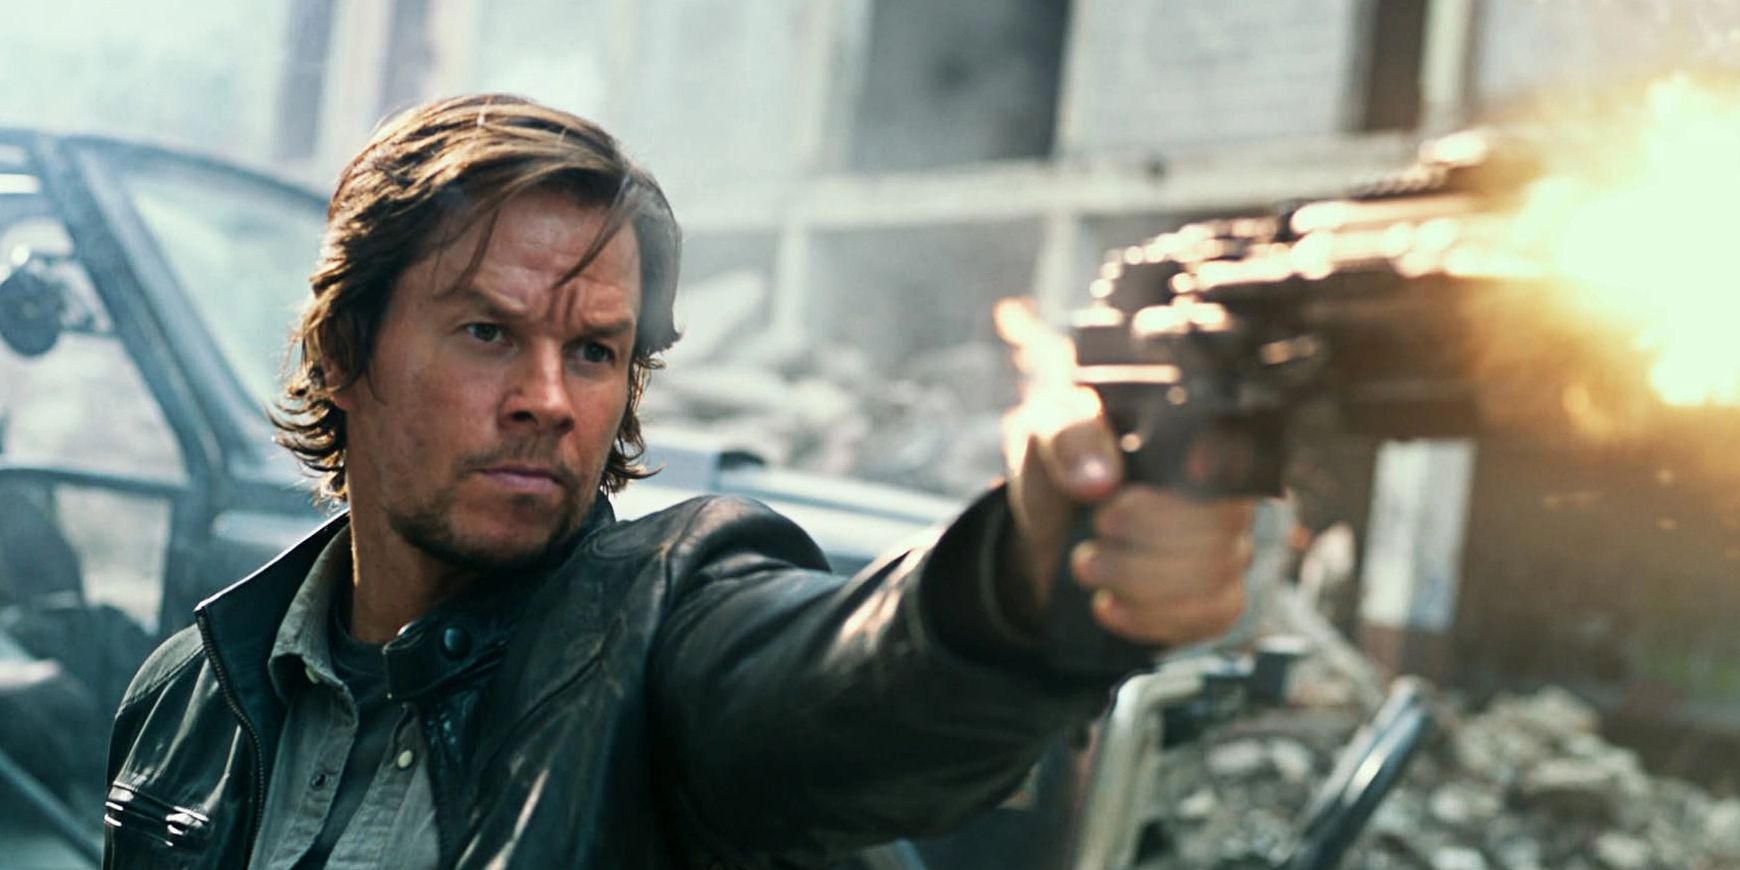 Mark Wahlberg as Cade Yeager in Transformers.